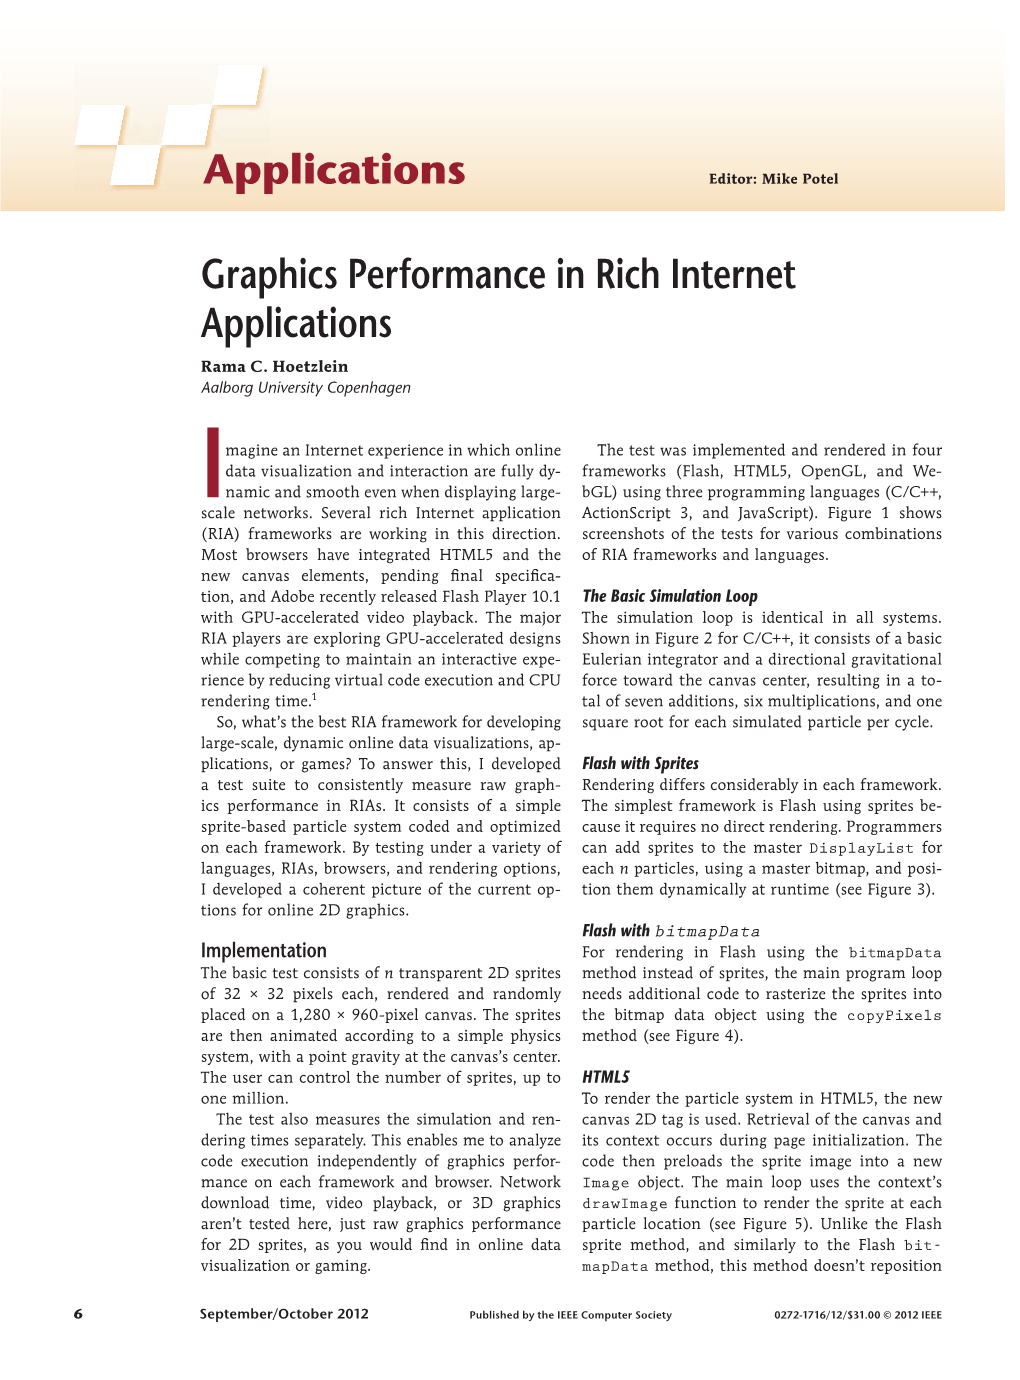 Applications Graphics Performance in Rich Internet Applications